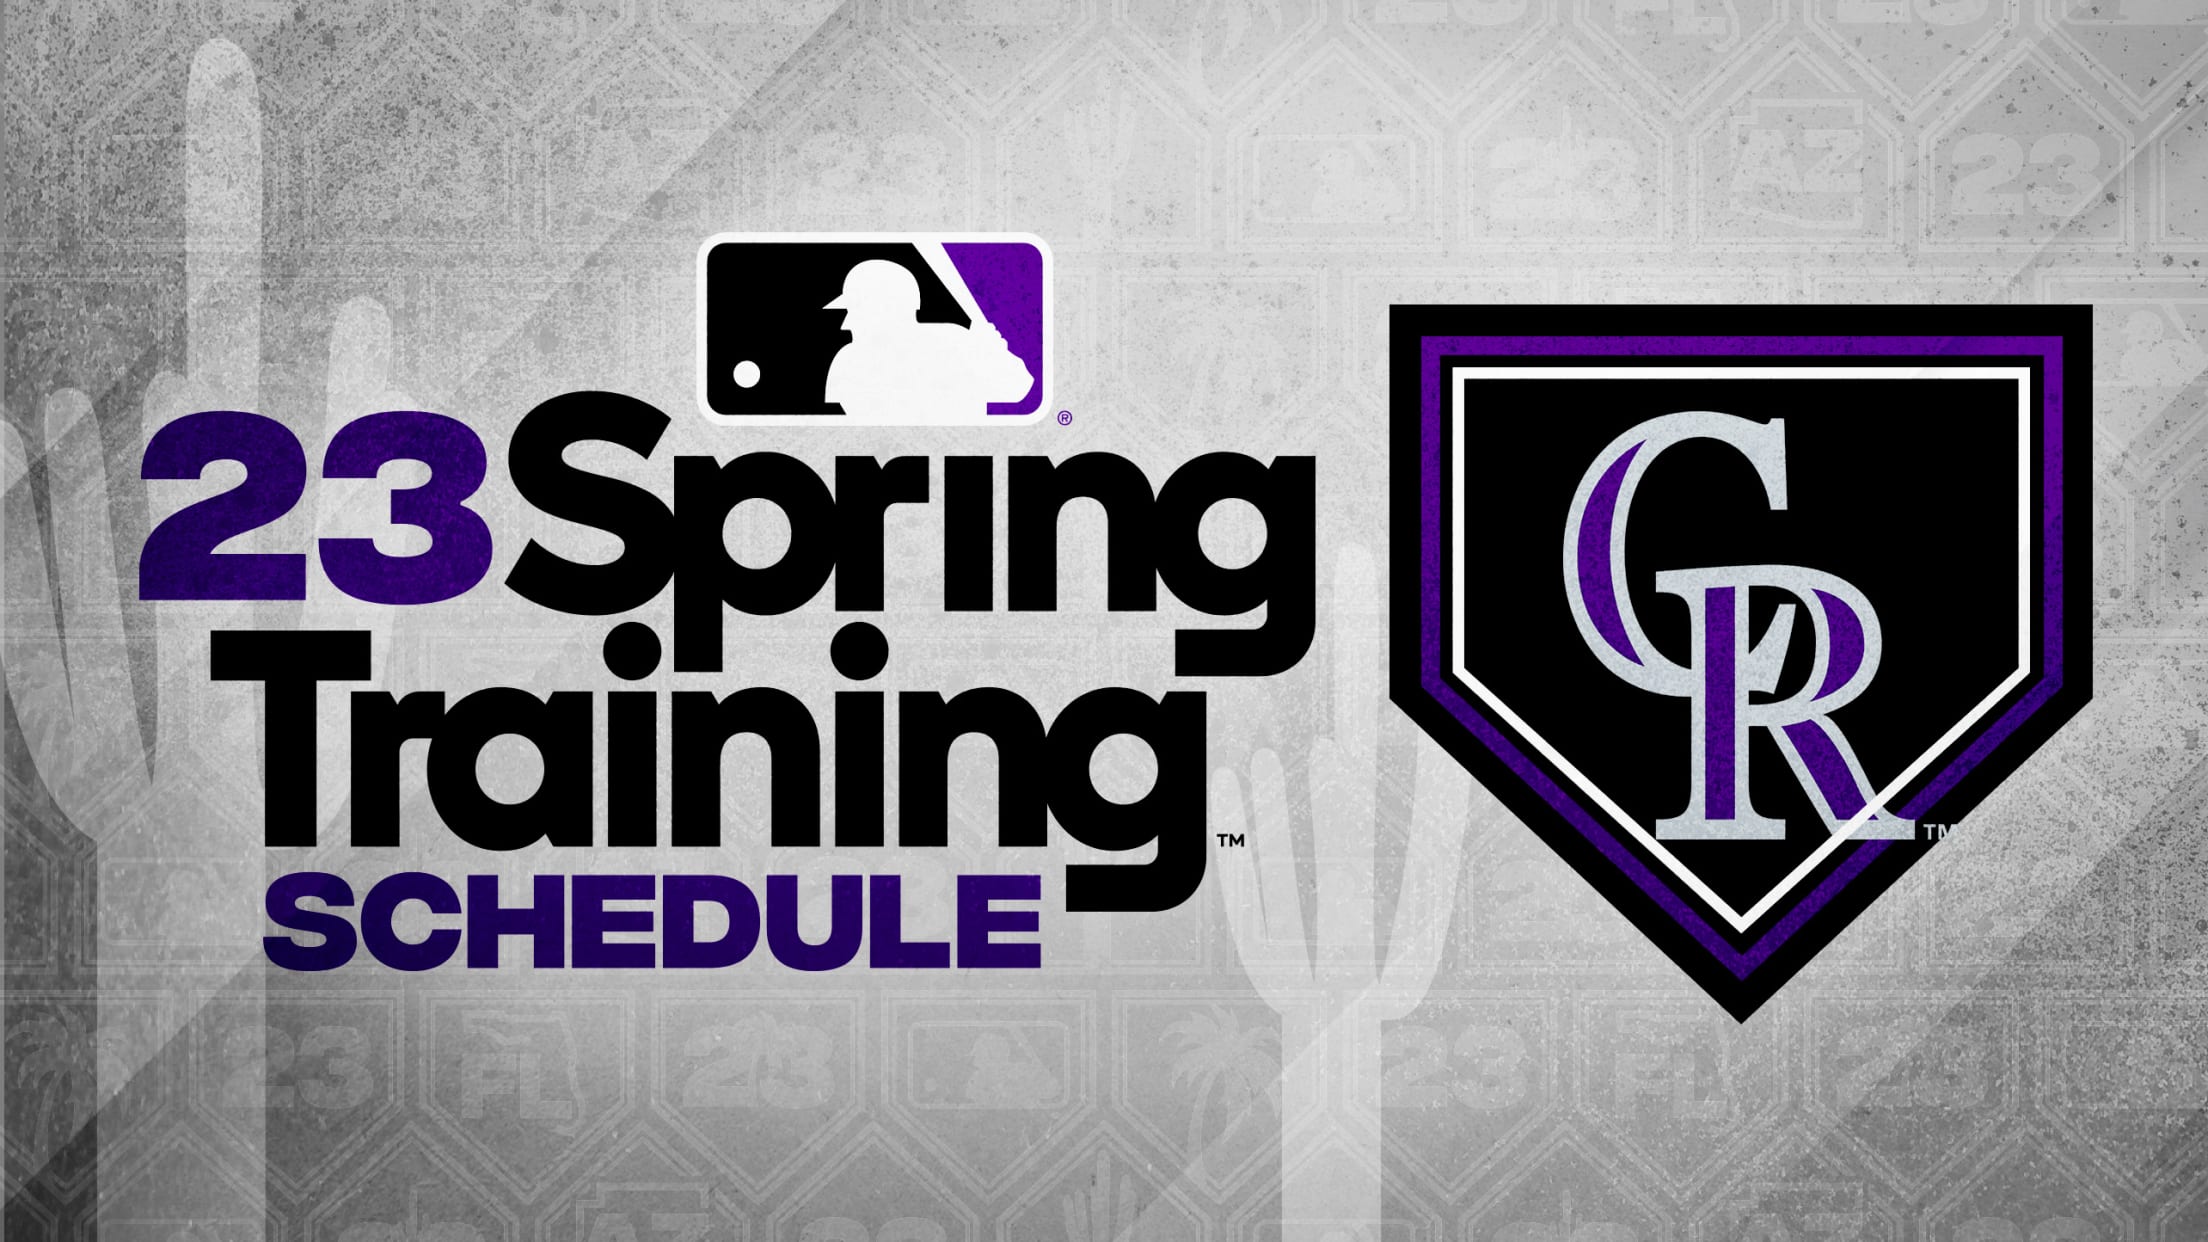 Rockies, other MLB clubs, suspend spring training operations